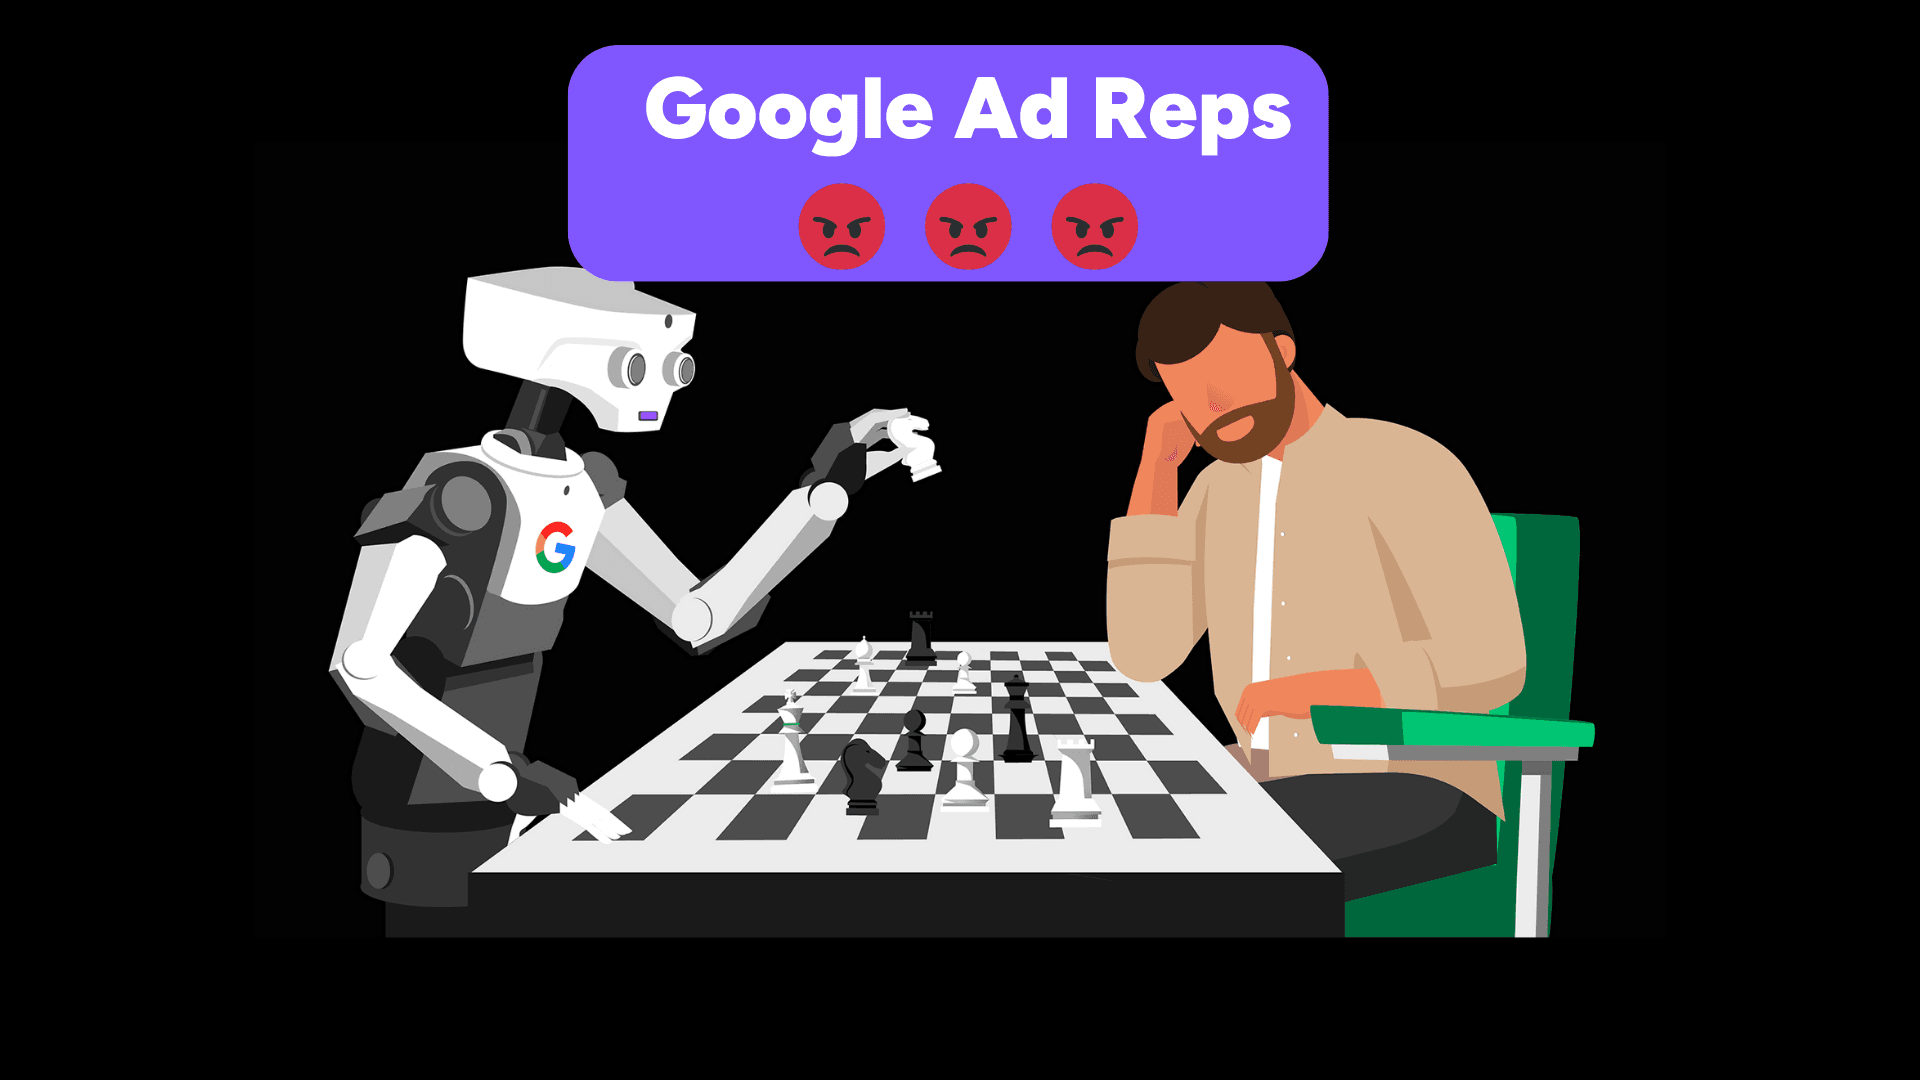 why you shouldn't trust google ad reps